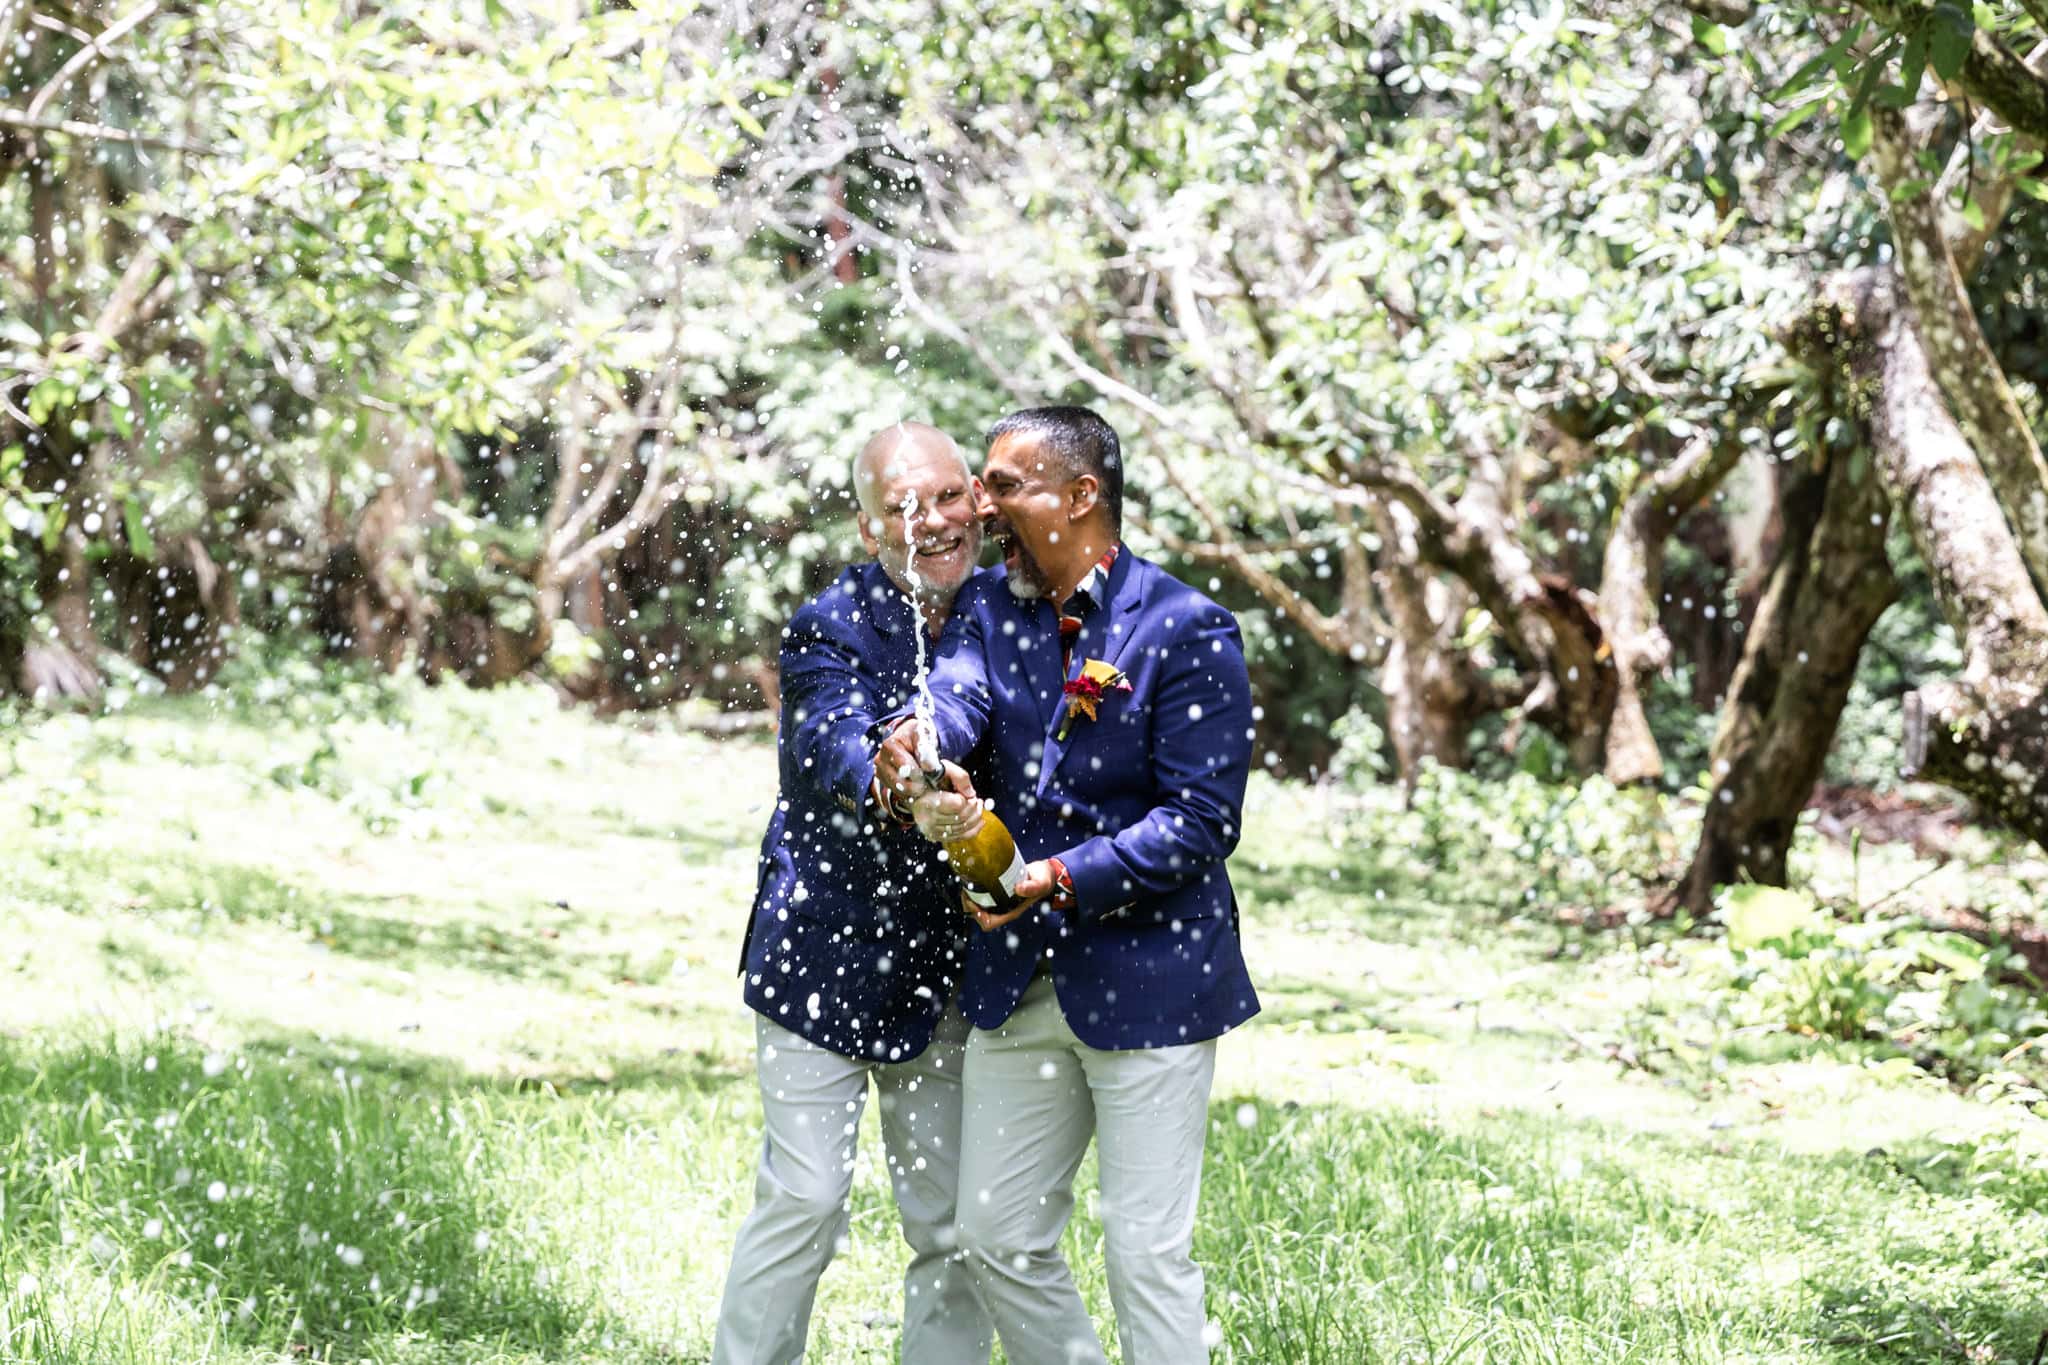 Pether's Rainforest Intimate Wedding Ceremony on location couples photos.